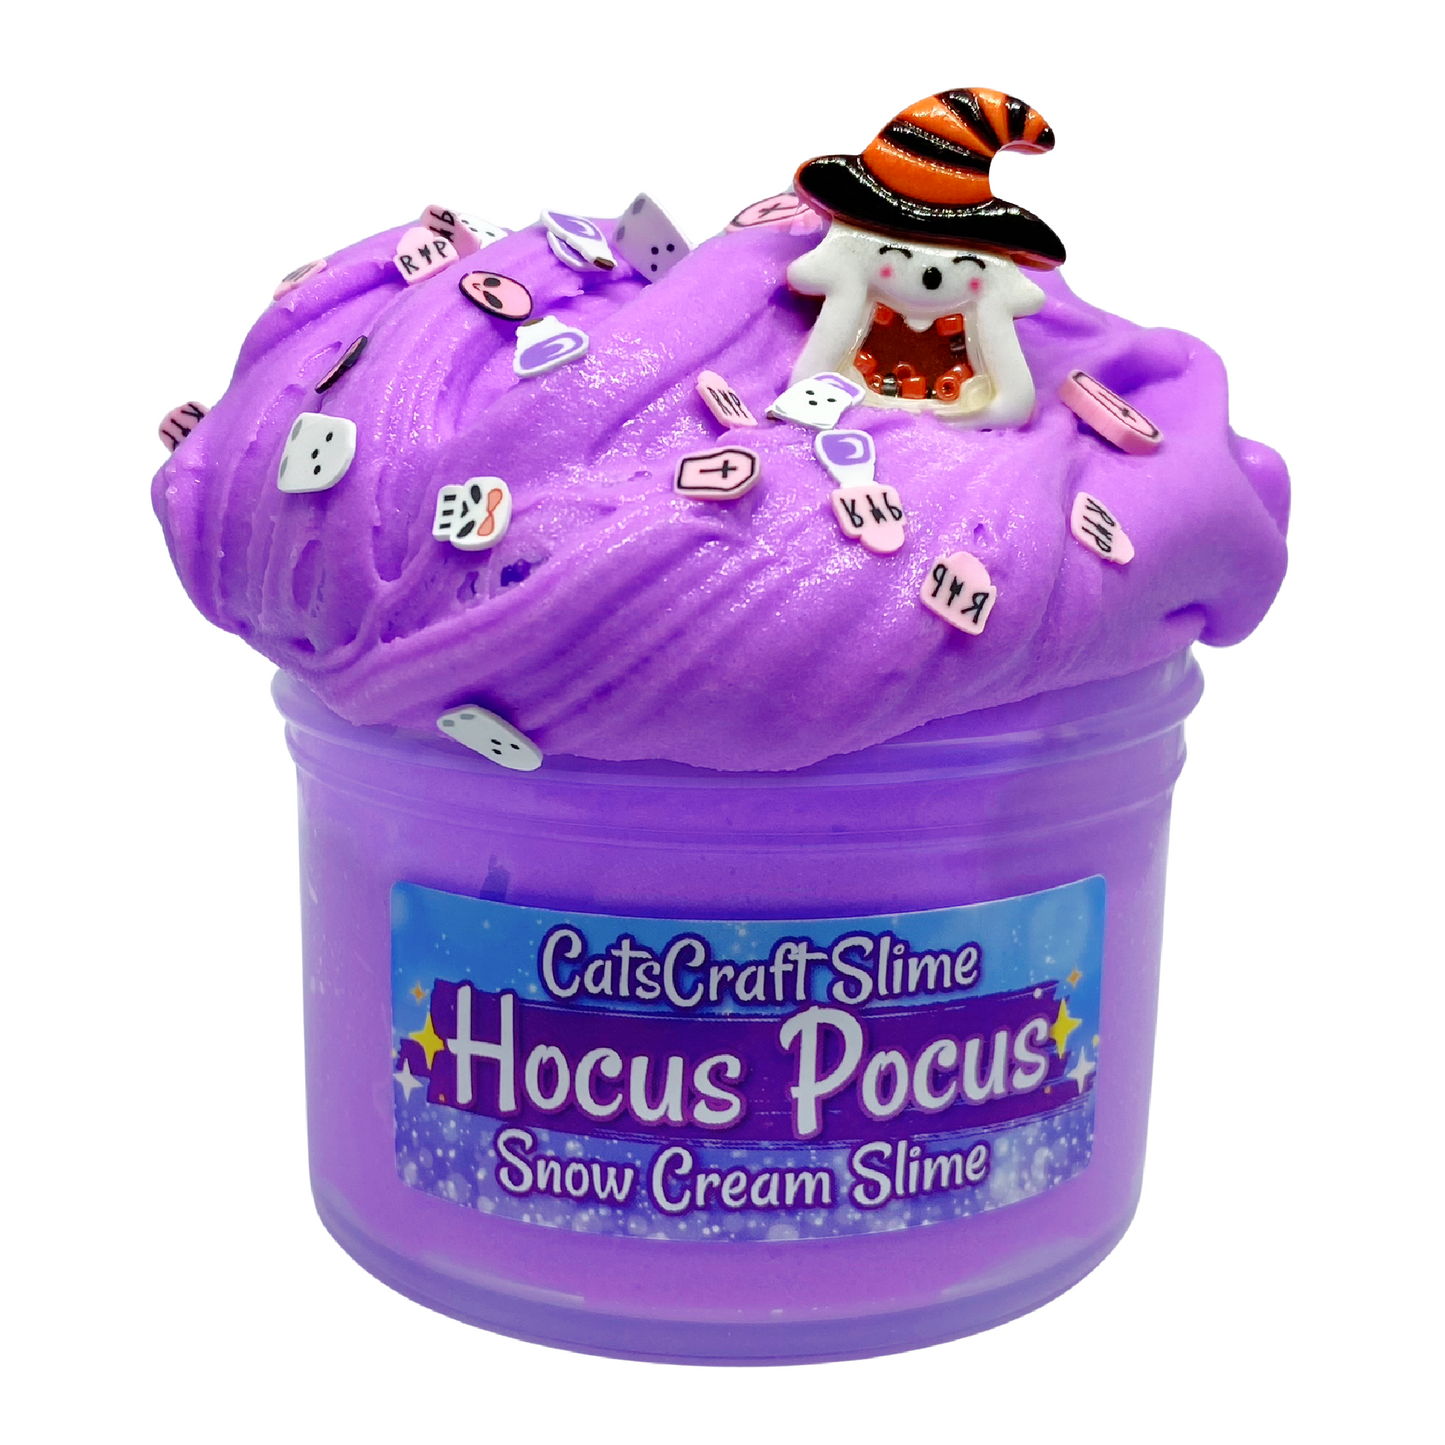 Snow Cream Slime "Hocus Pocus" Sprinkles Scented with Charm and Inflating Soft ASMR